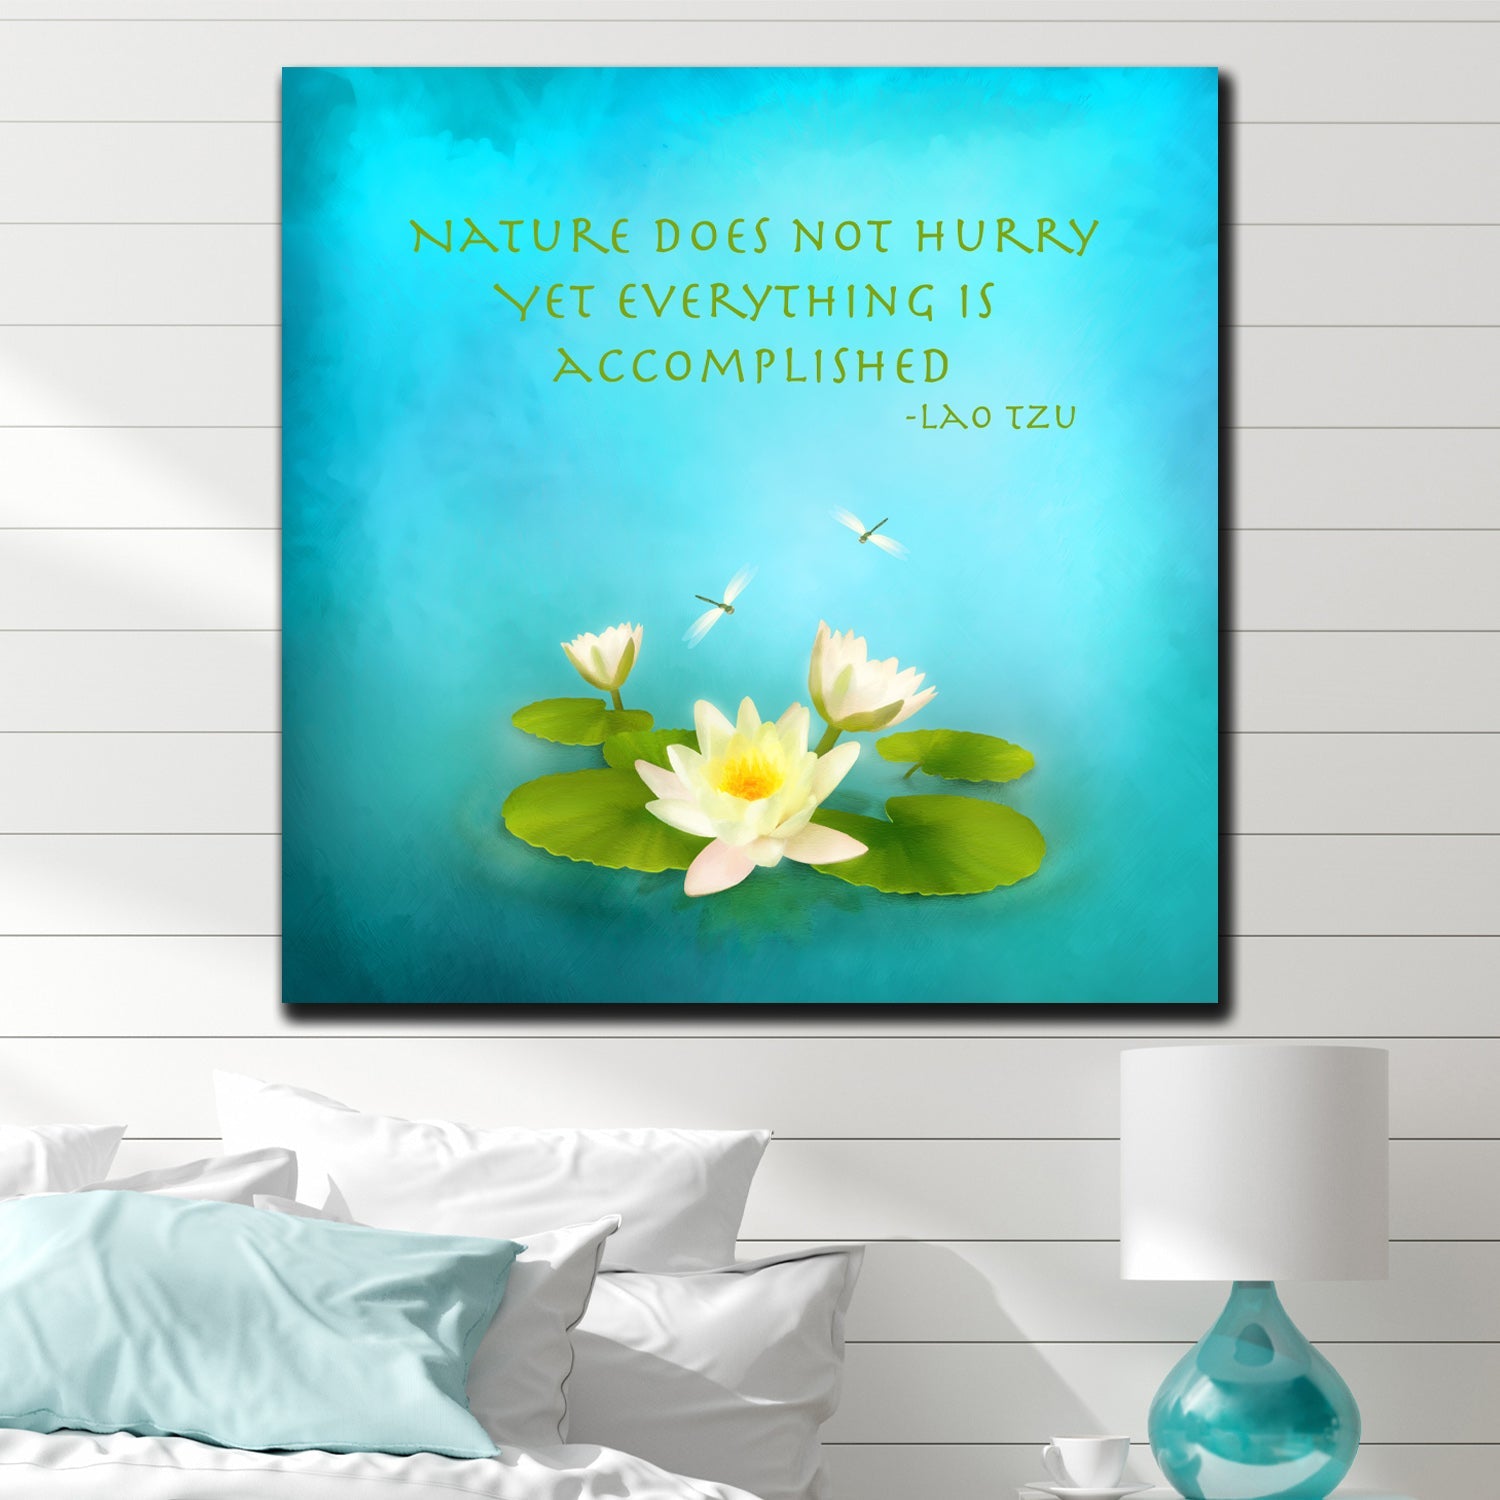 https://cdn.shopify.com/s/files/1/0387/9986/8044/products/NatureDoesnotHurryCanvasArtprintStretched-1.jpg